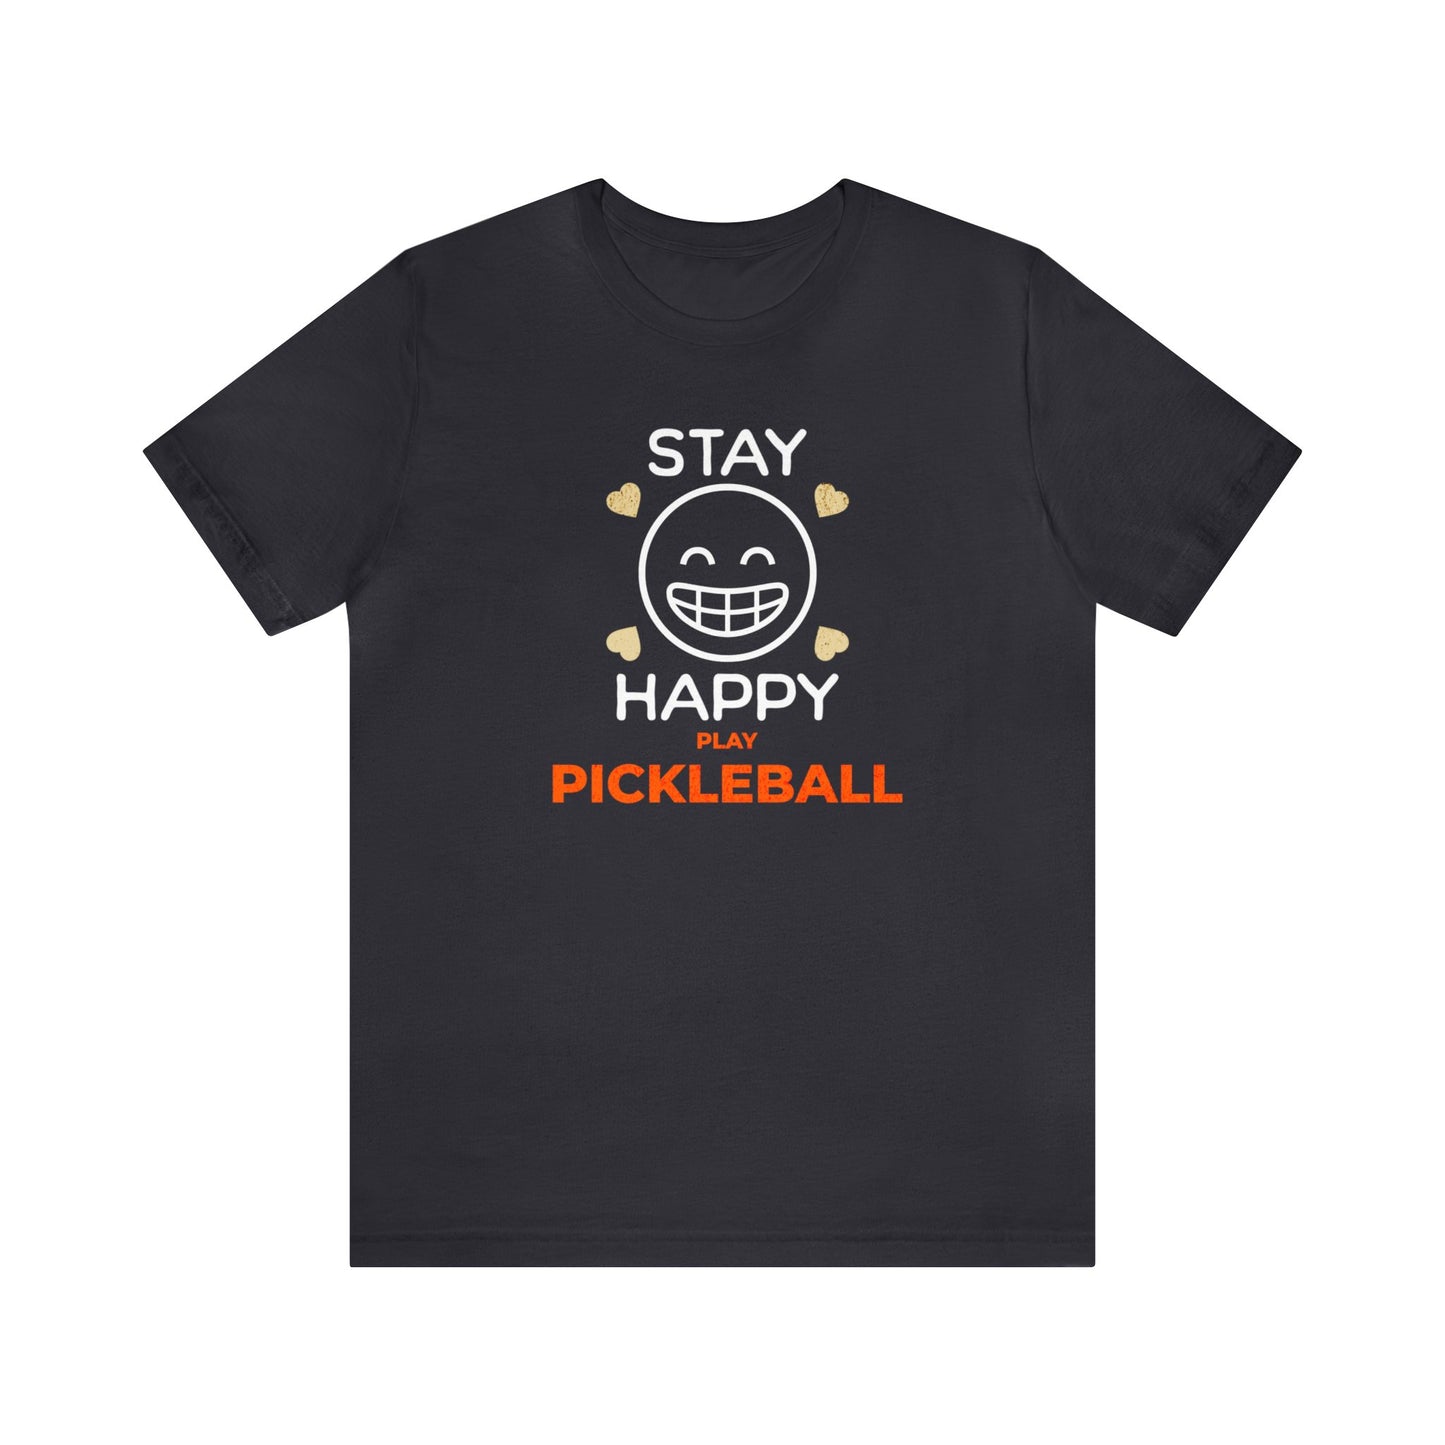 Stay Happy - Play Pickleball Enthusiast's Shirt